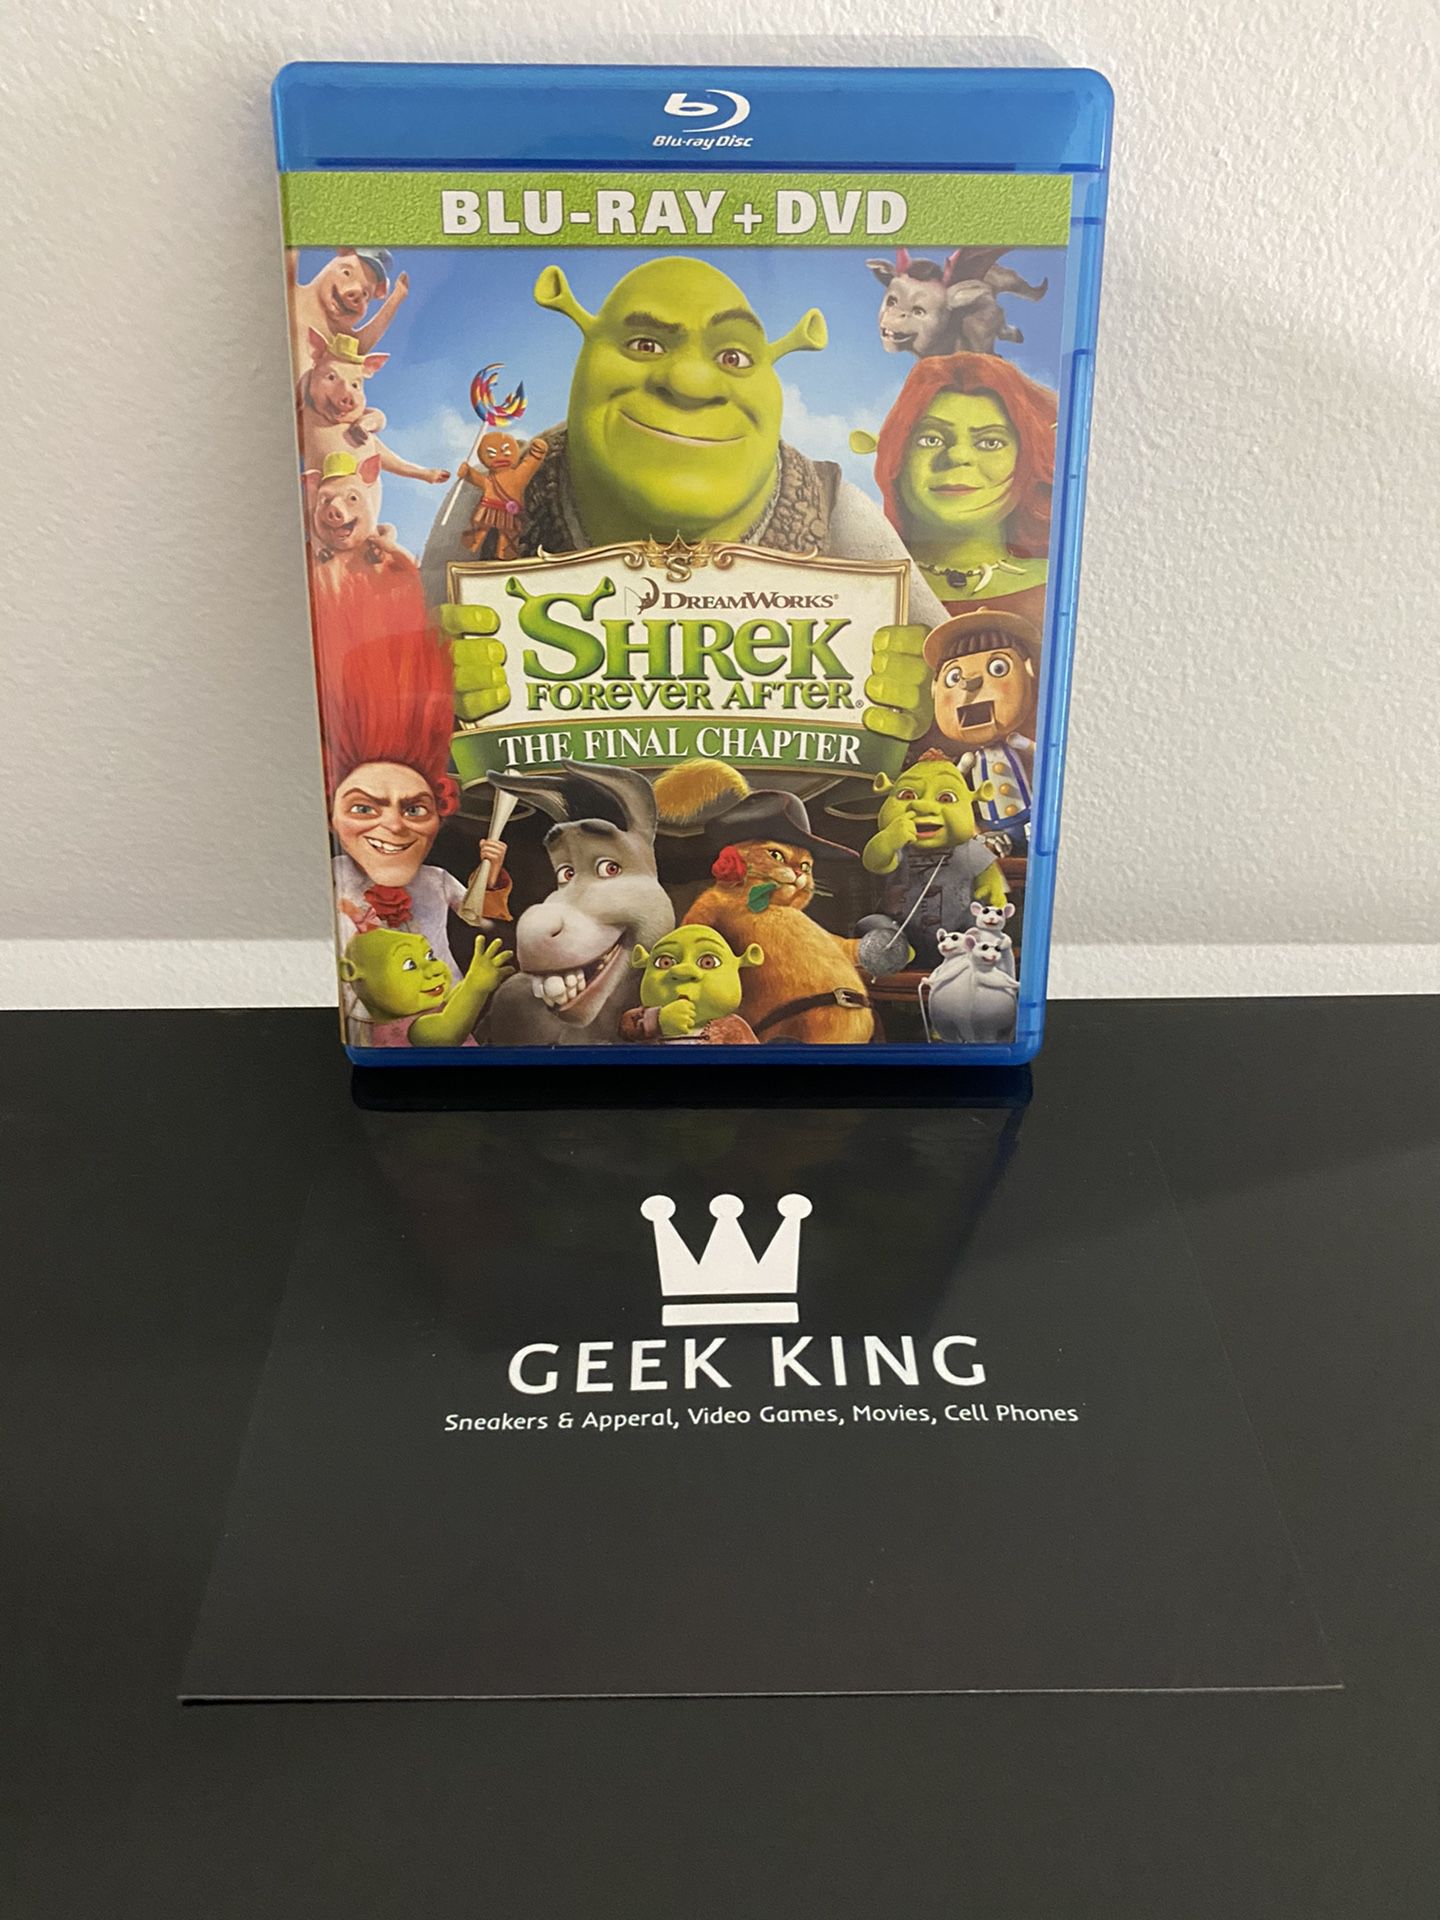 Shrek forever after the final chapter Blu-ray